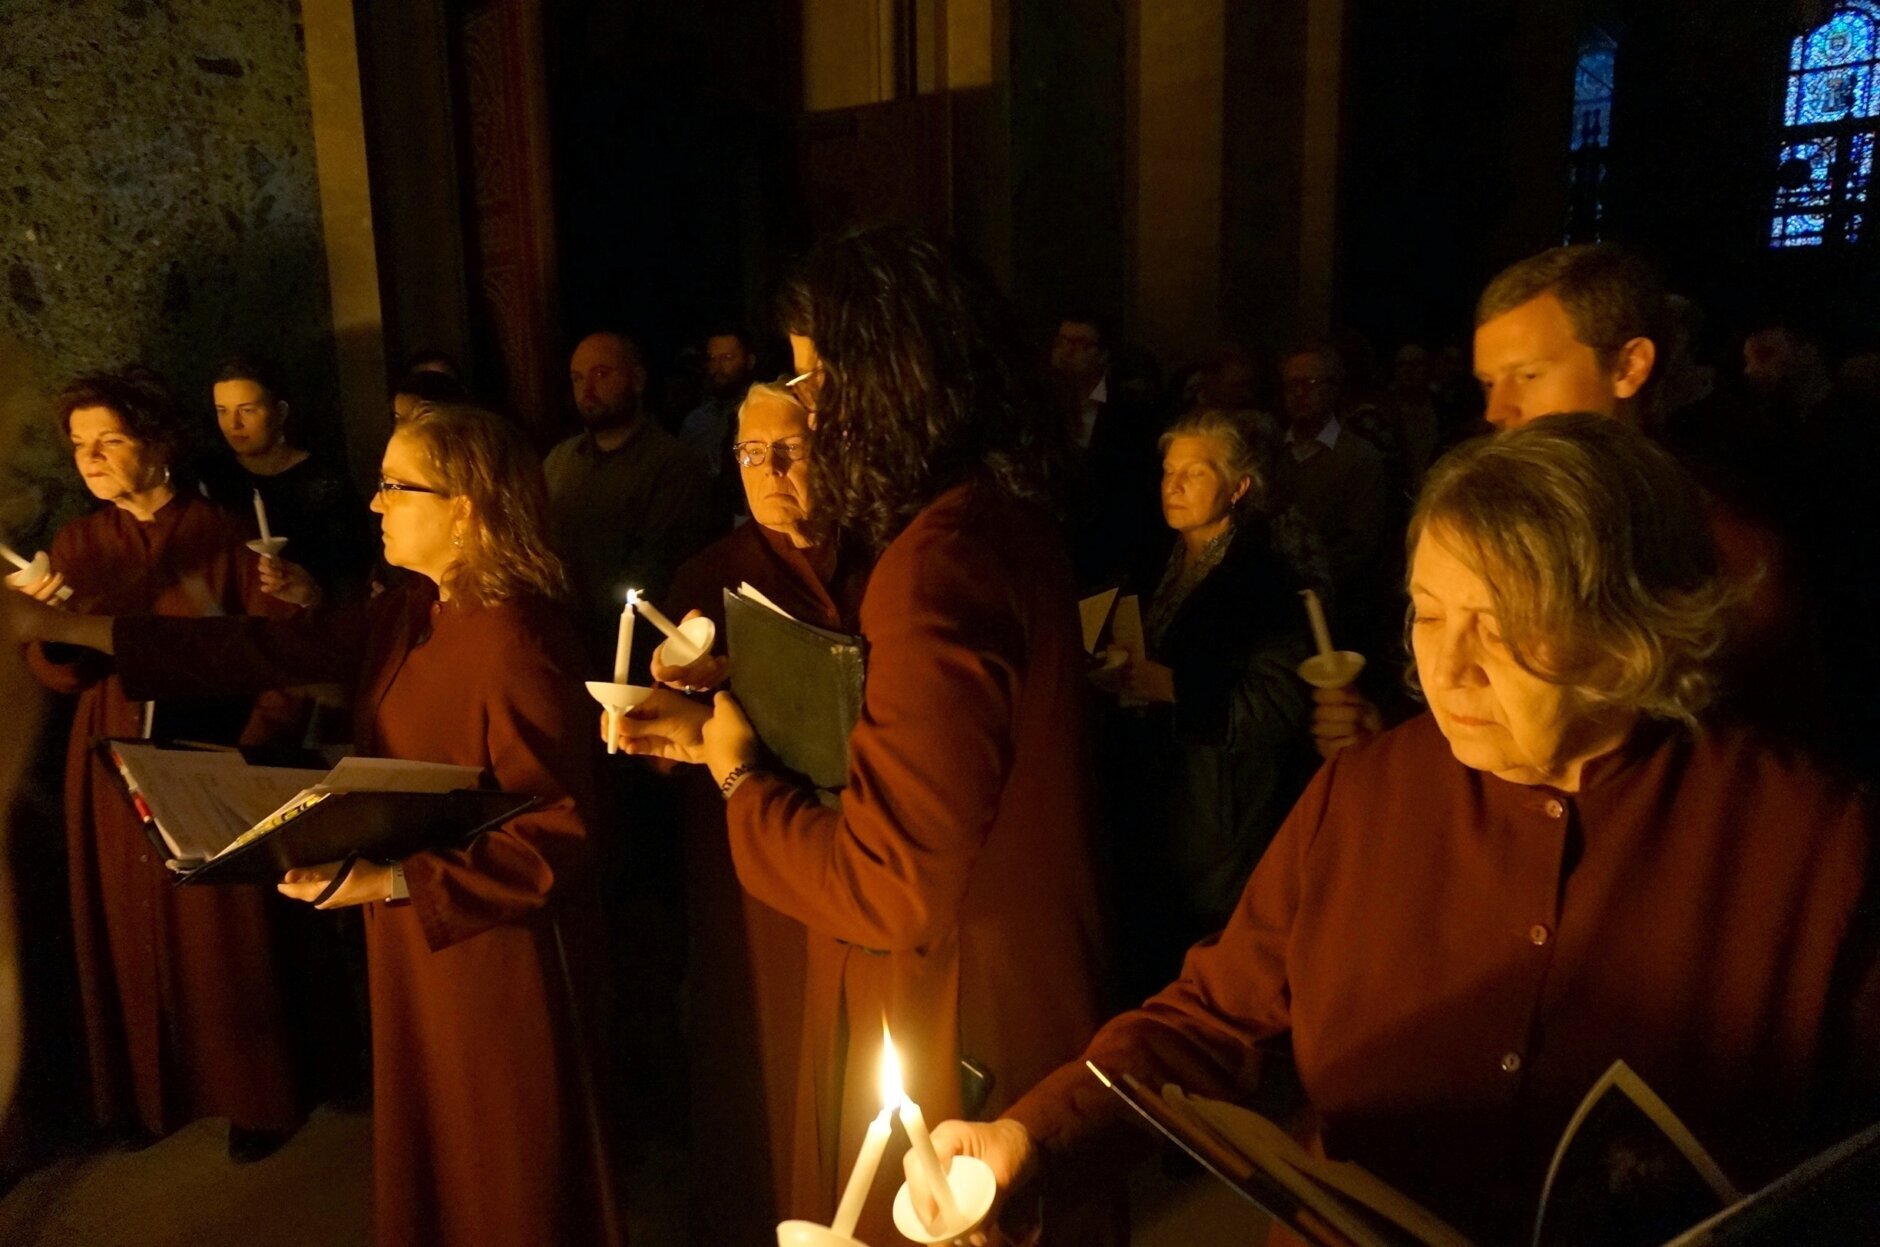 Members of the choir light candles at the beginning of the Easter Vigil Mass at the Cathedral of St. Paul in St. Paul, Minn.,, on Saturday, April 16, 2022. For many U.S. Christians, this weekend marks the first time since 2019 that they will gather in person on Easter Sunday, a welcome chance to celebrate one of the year's holiest days side by side with fellow congregants.  (AP Photo/Giovanna Dell'Orto)